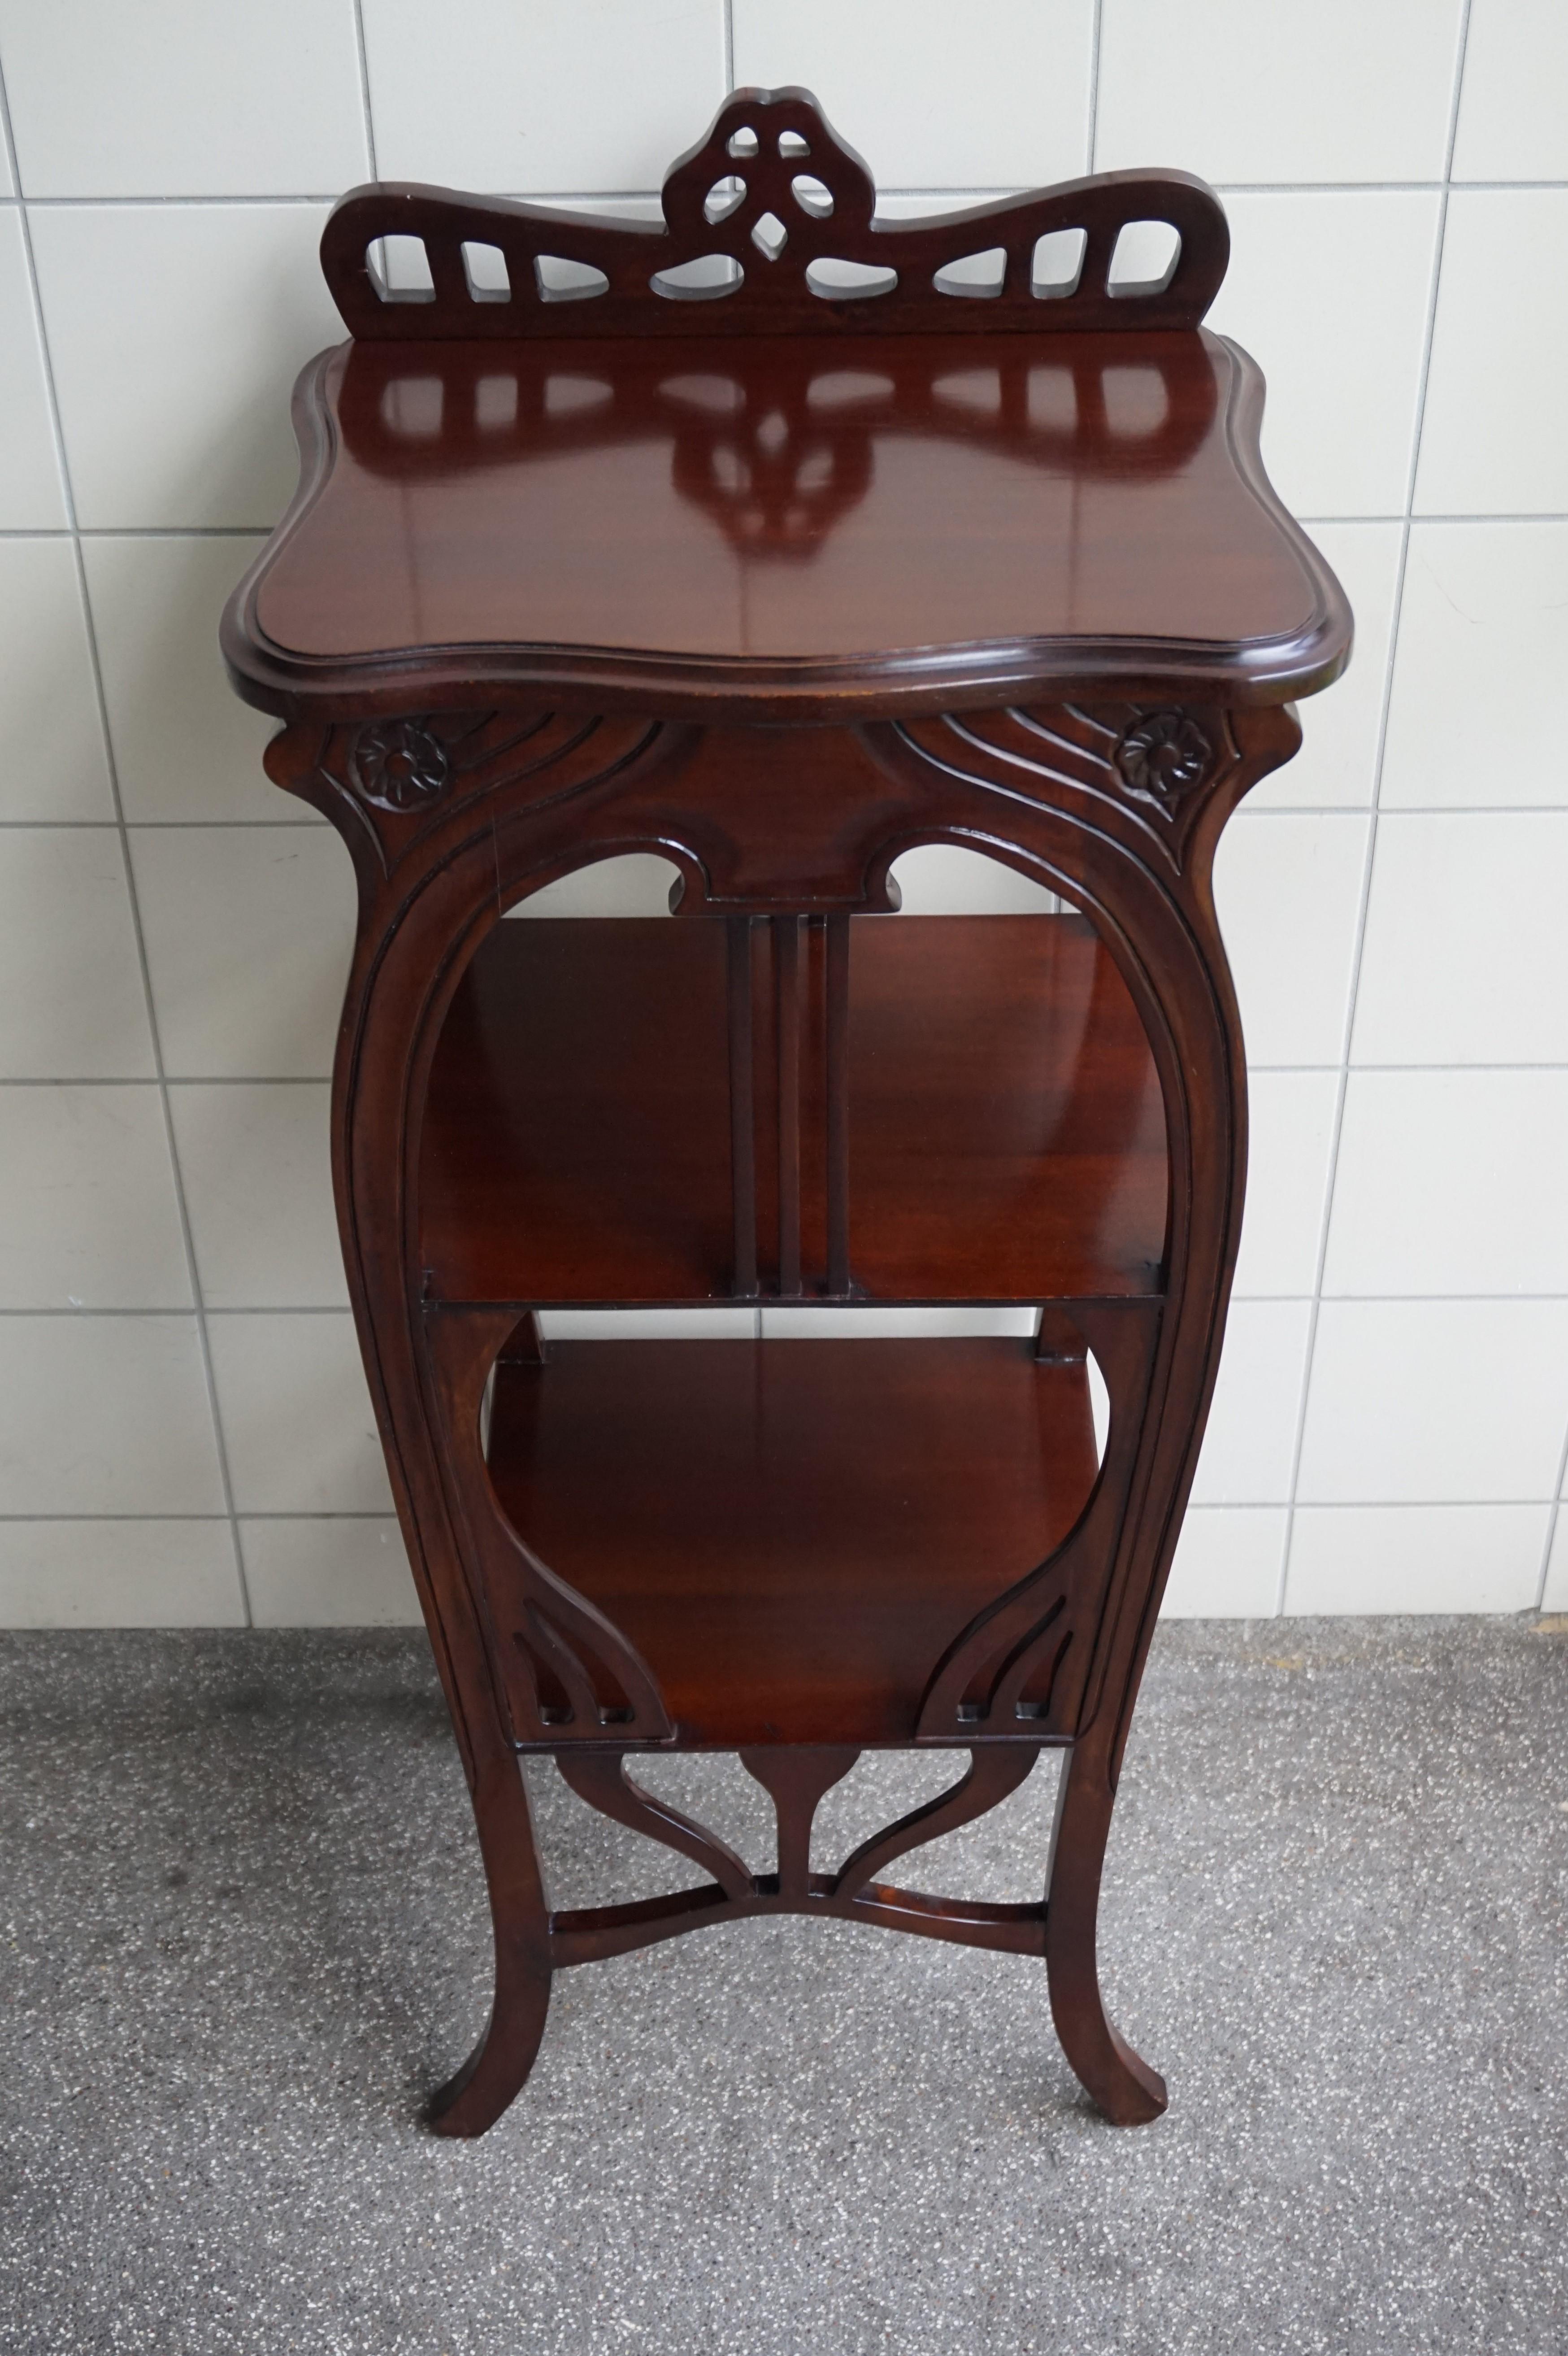 Beautiful and practical Art Nouveau style table.

This fine looking and remarkable condition table in the Art Nouveau style is almost entirely made of solid mahogany or teakwood. Thanks to the elegant shape and the wonderful color it is an absolute